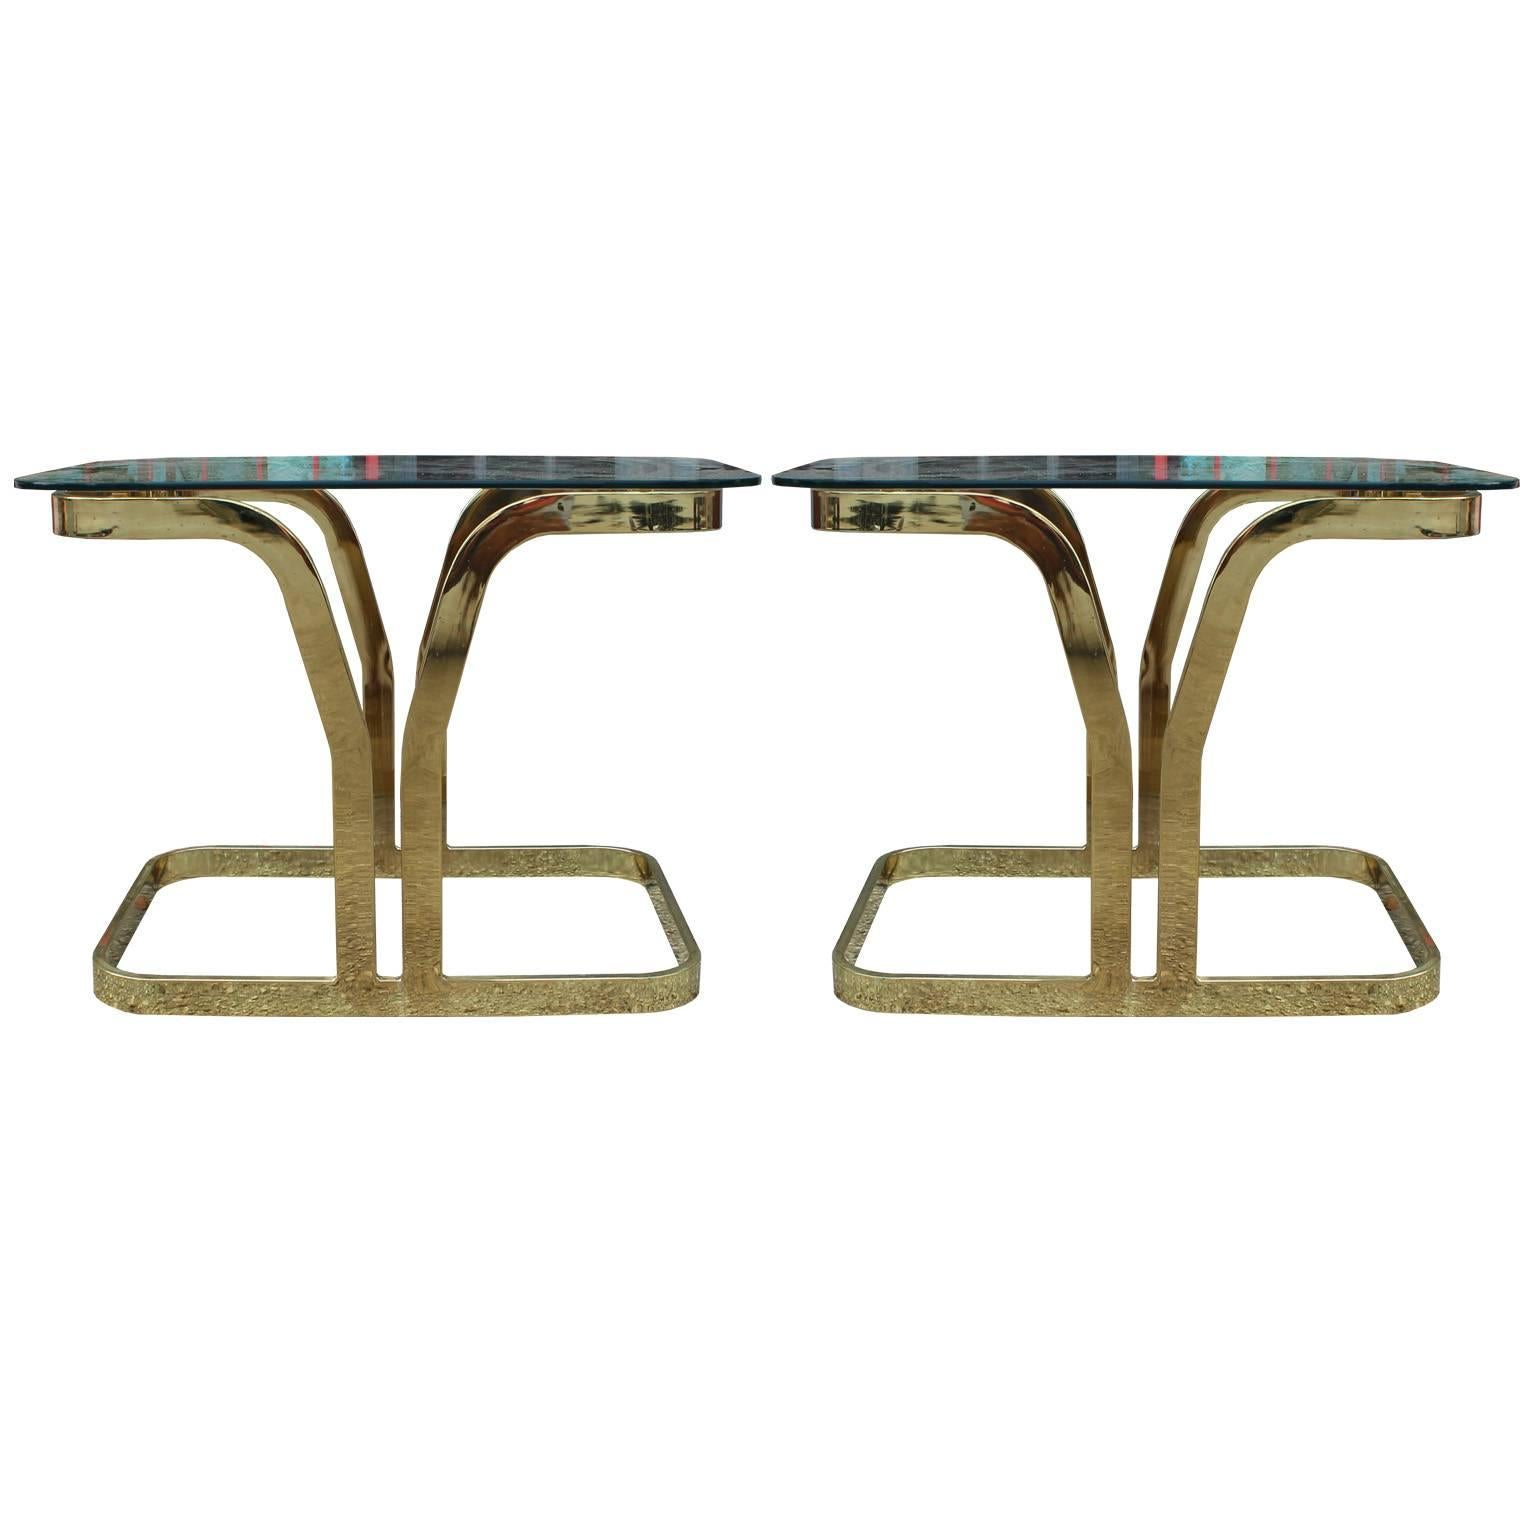 Excellent pair of cantilevered side or end tables. Sculptural brass bases have excellent lines. Topped with half inch thick glass. In the style of Karl Springer or Pace Collection. In nice vintage condition.